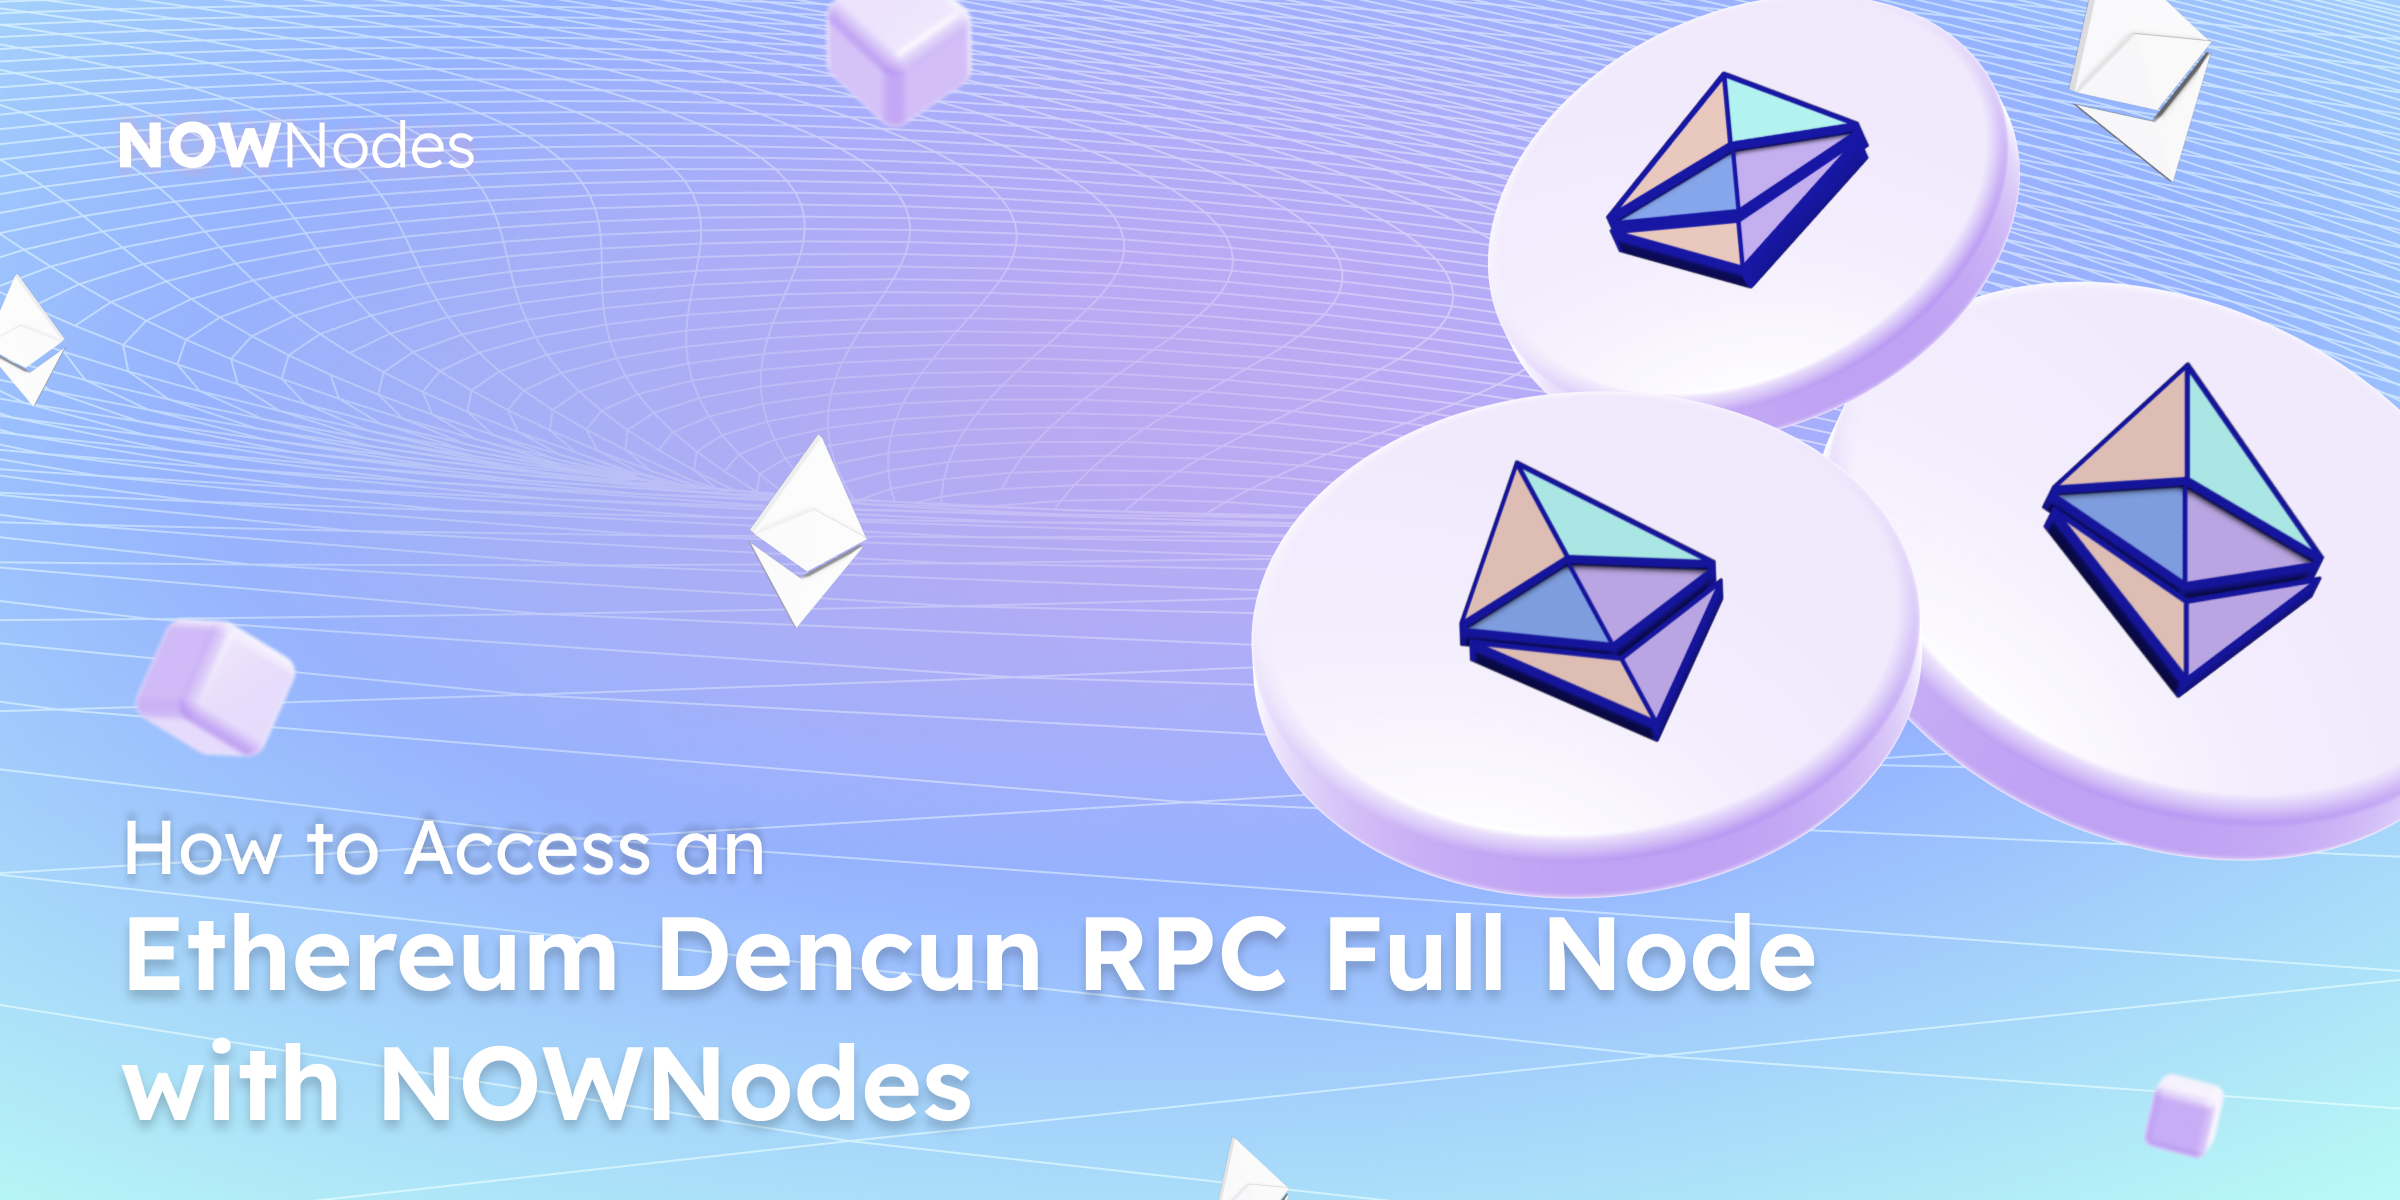 NOWNodes
How to Access an Ethereum Dencun RPC Full Node with NOWNodes 